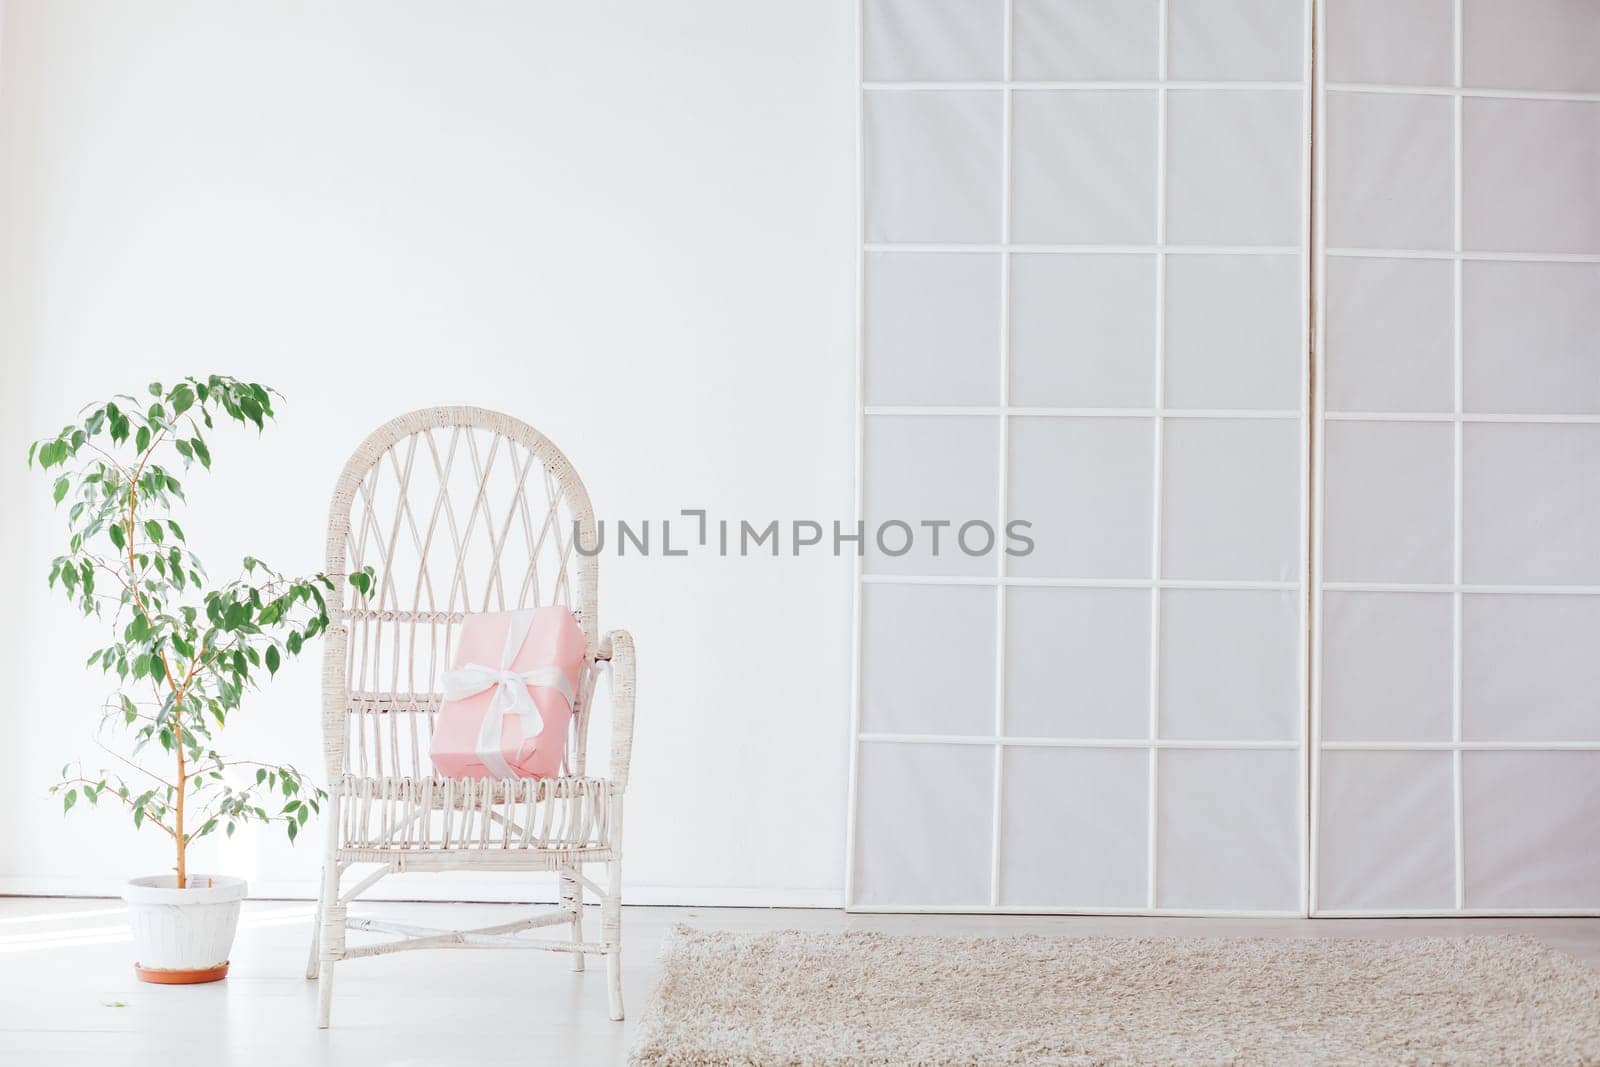 vintage chair in the interior of an empty white room